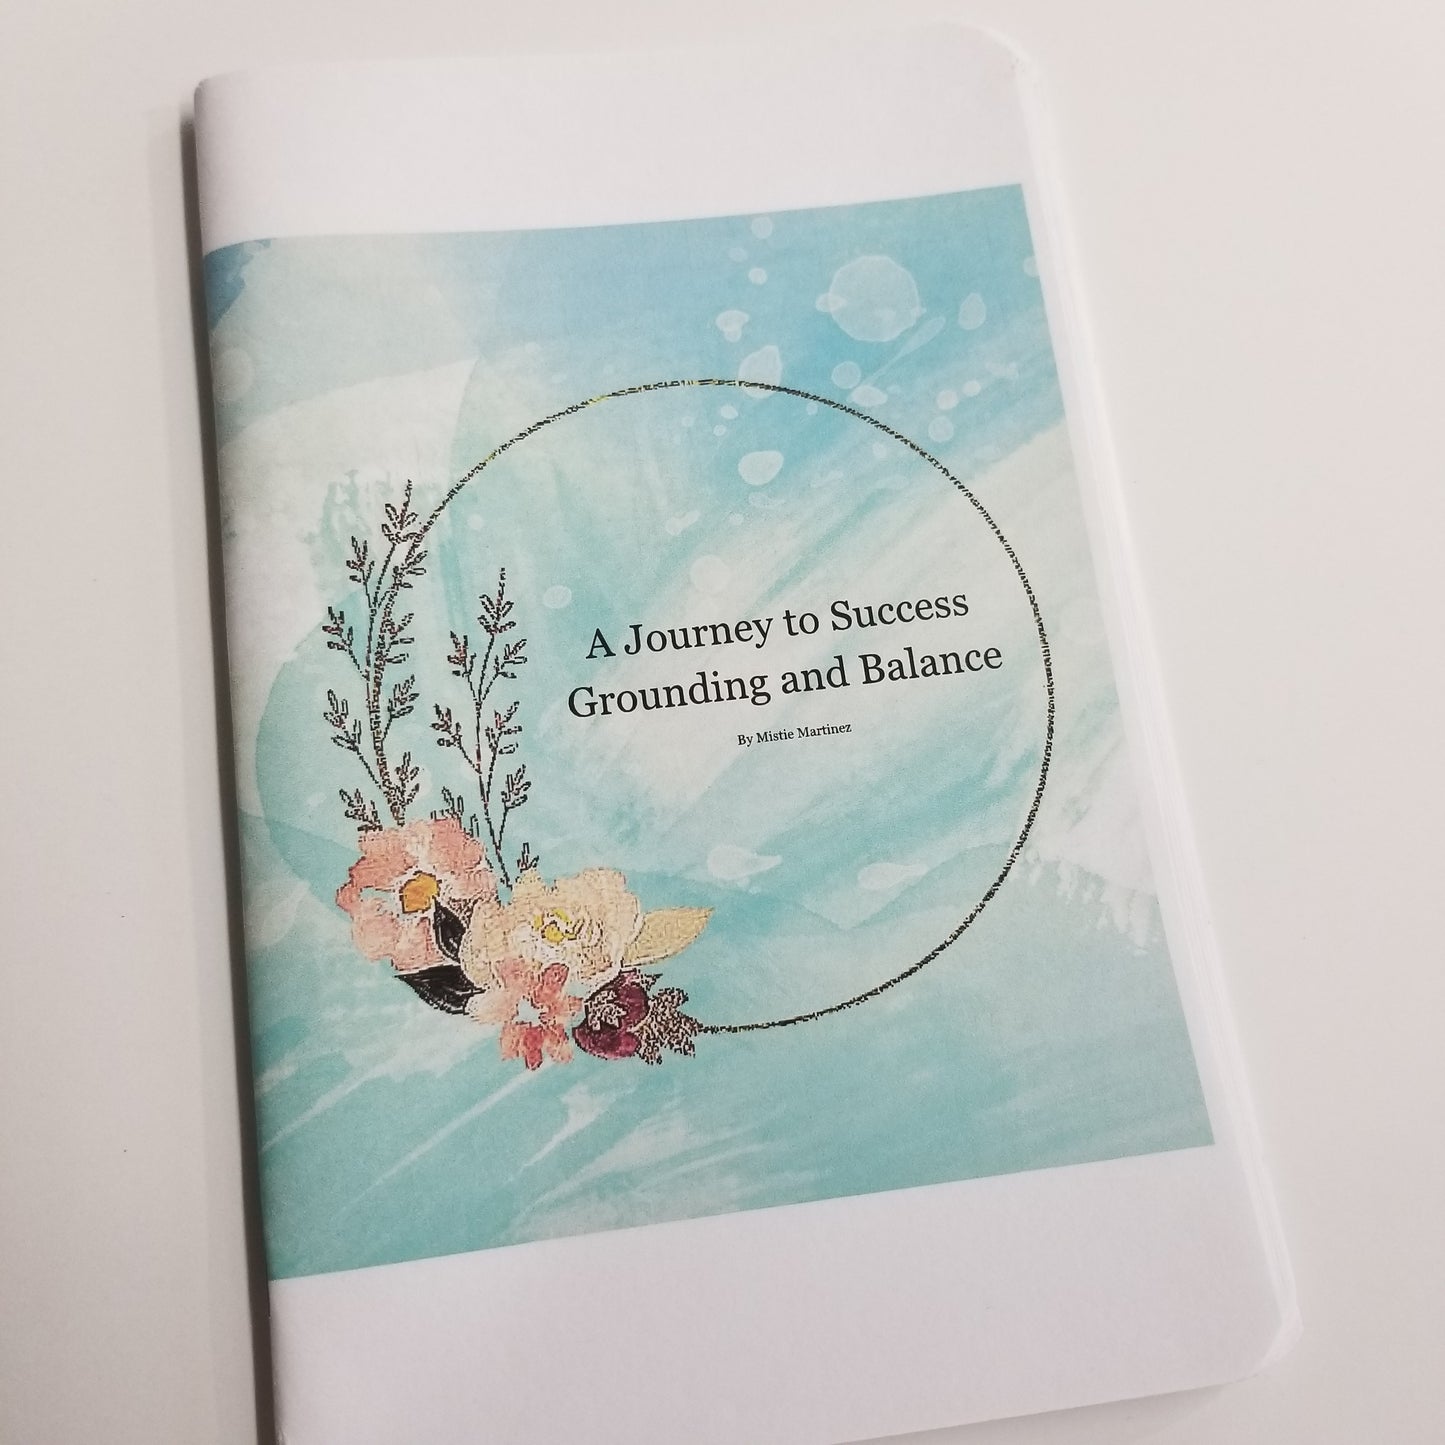 Grounding and Balance - A Journey to Success